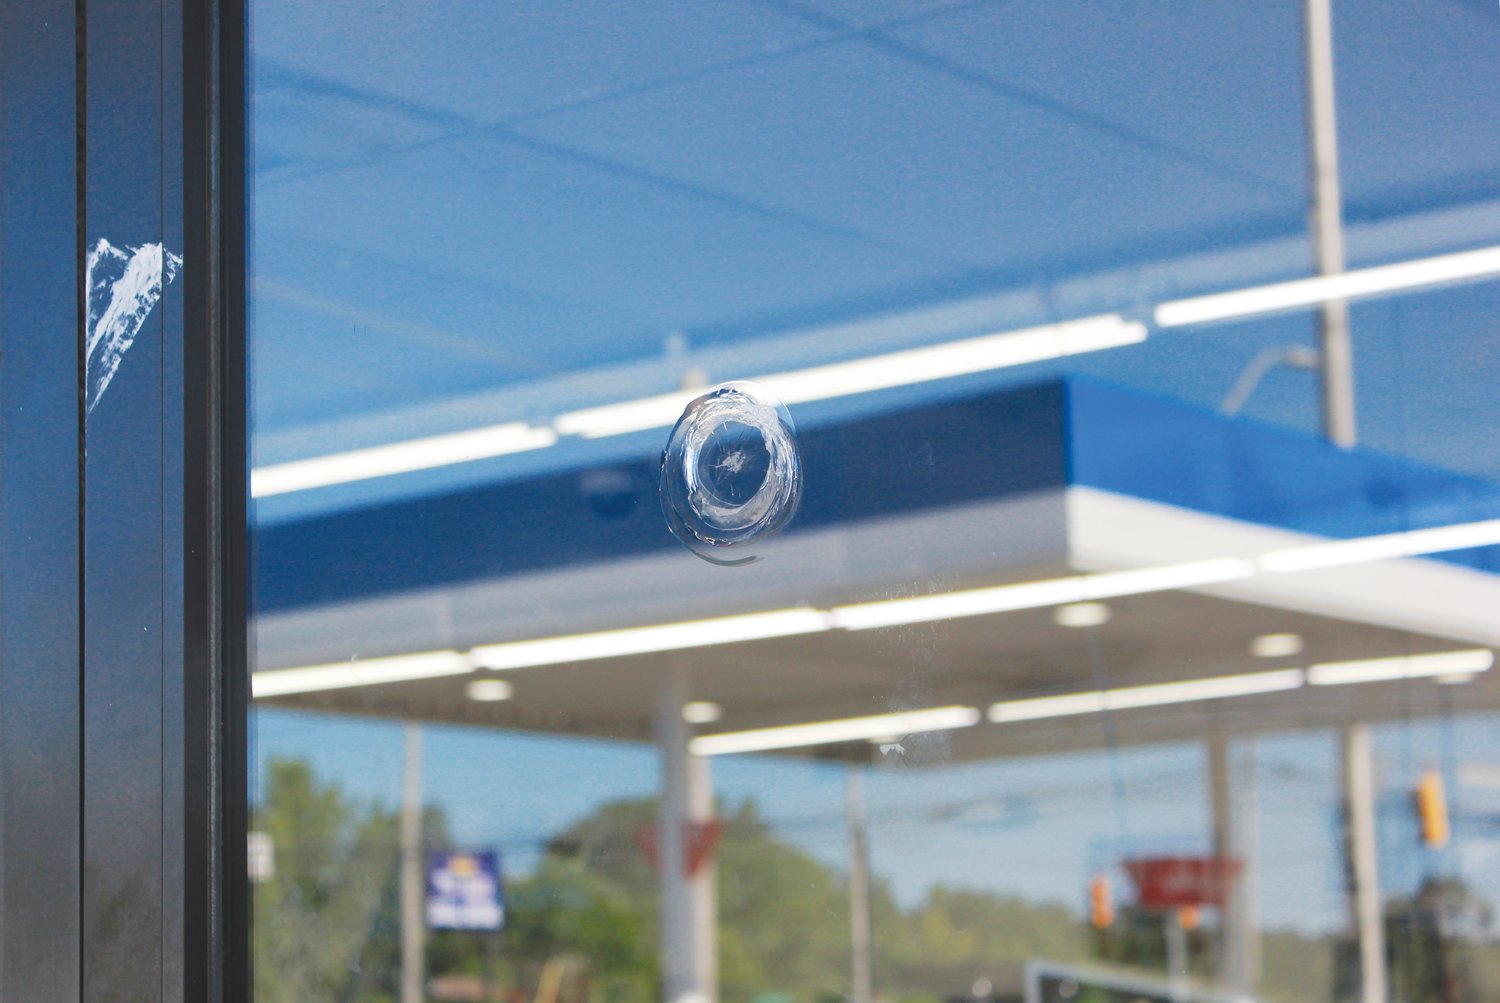 The glass door of the Park ’n Shop gas station is marked by a bullet hole from the shooting that occurred July 9 in Siler City. According to the SCPD, the shooting is still under investigation and charges are pending.